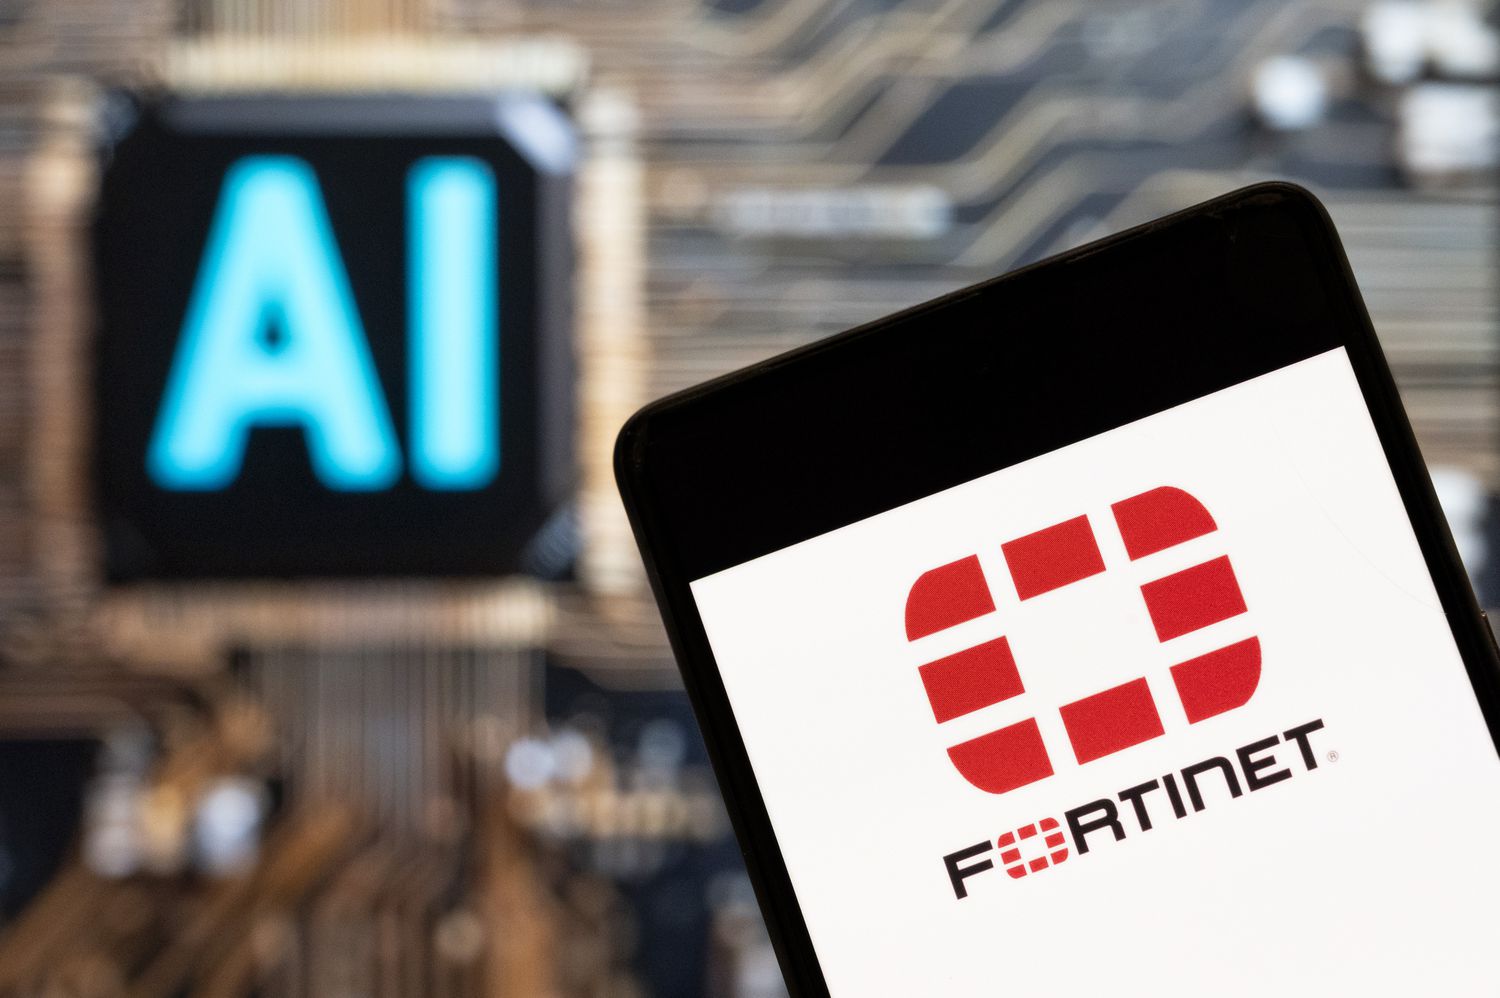 Cybersecurity Firm Fortinet’s Billings Drag Stock Despite Revenue and Earnings Beat [Video]